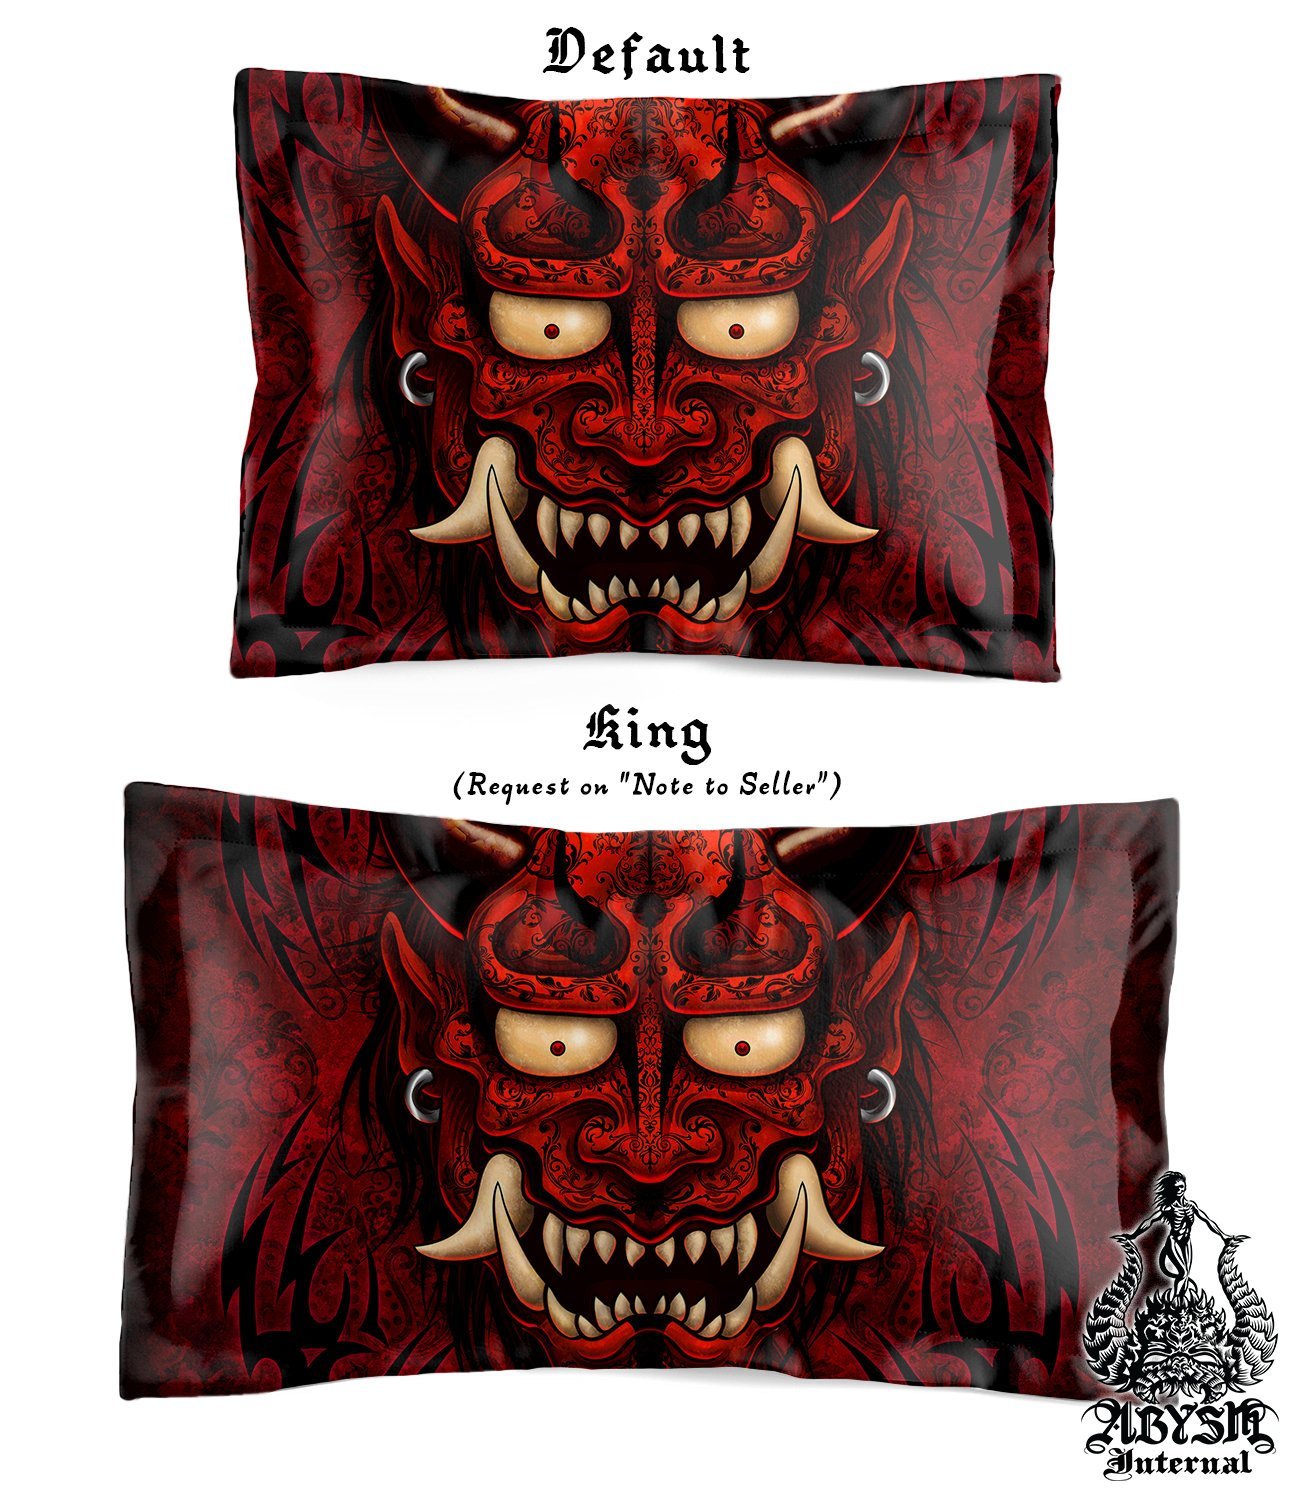 Oni Bedding Set, Comforter and Duvet, Goth Art, Alternative Bed Cover and Bedroom Decor, King, Queen and Twin Size - Red and Black Tattoo, Japanese Demon - Abysm Internal